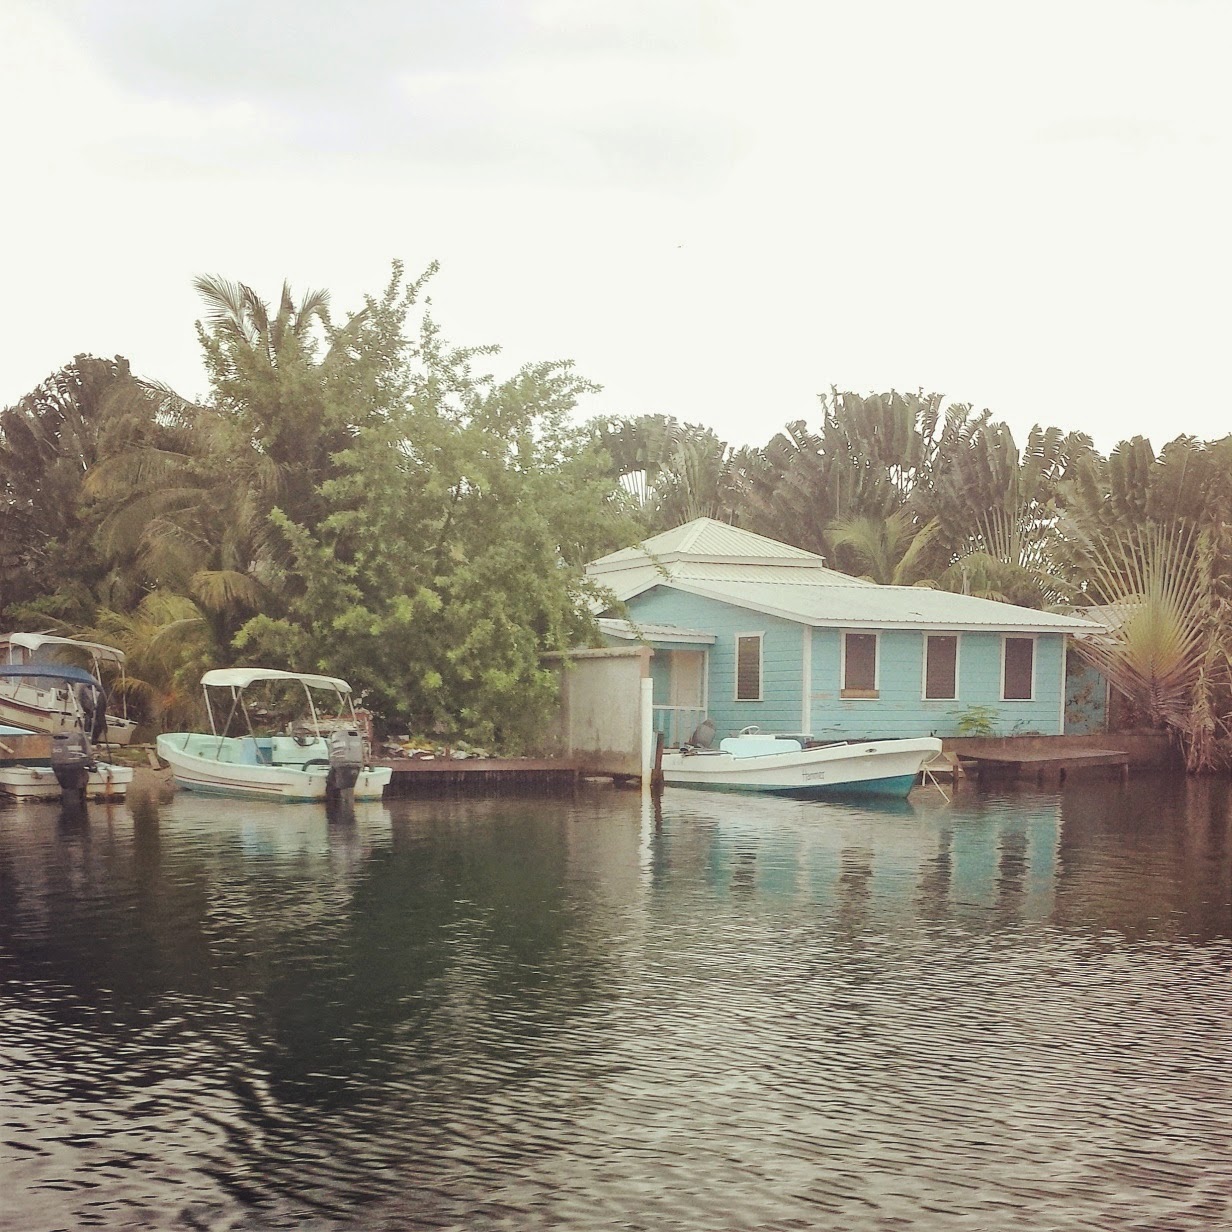 Remaxvipbelize: Placencia to sentiment on the boat house